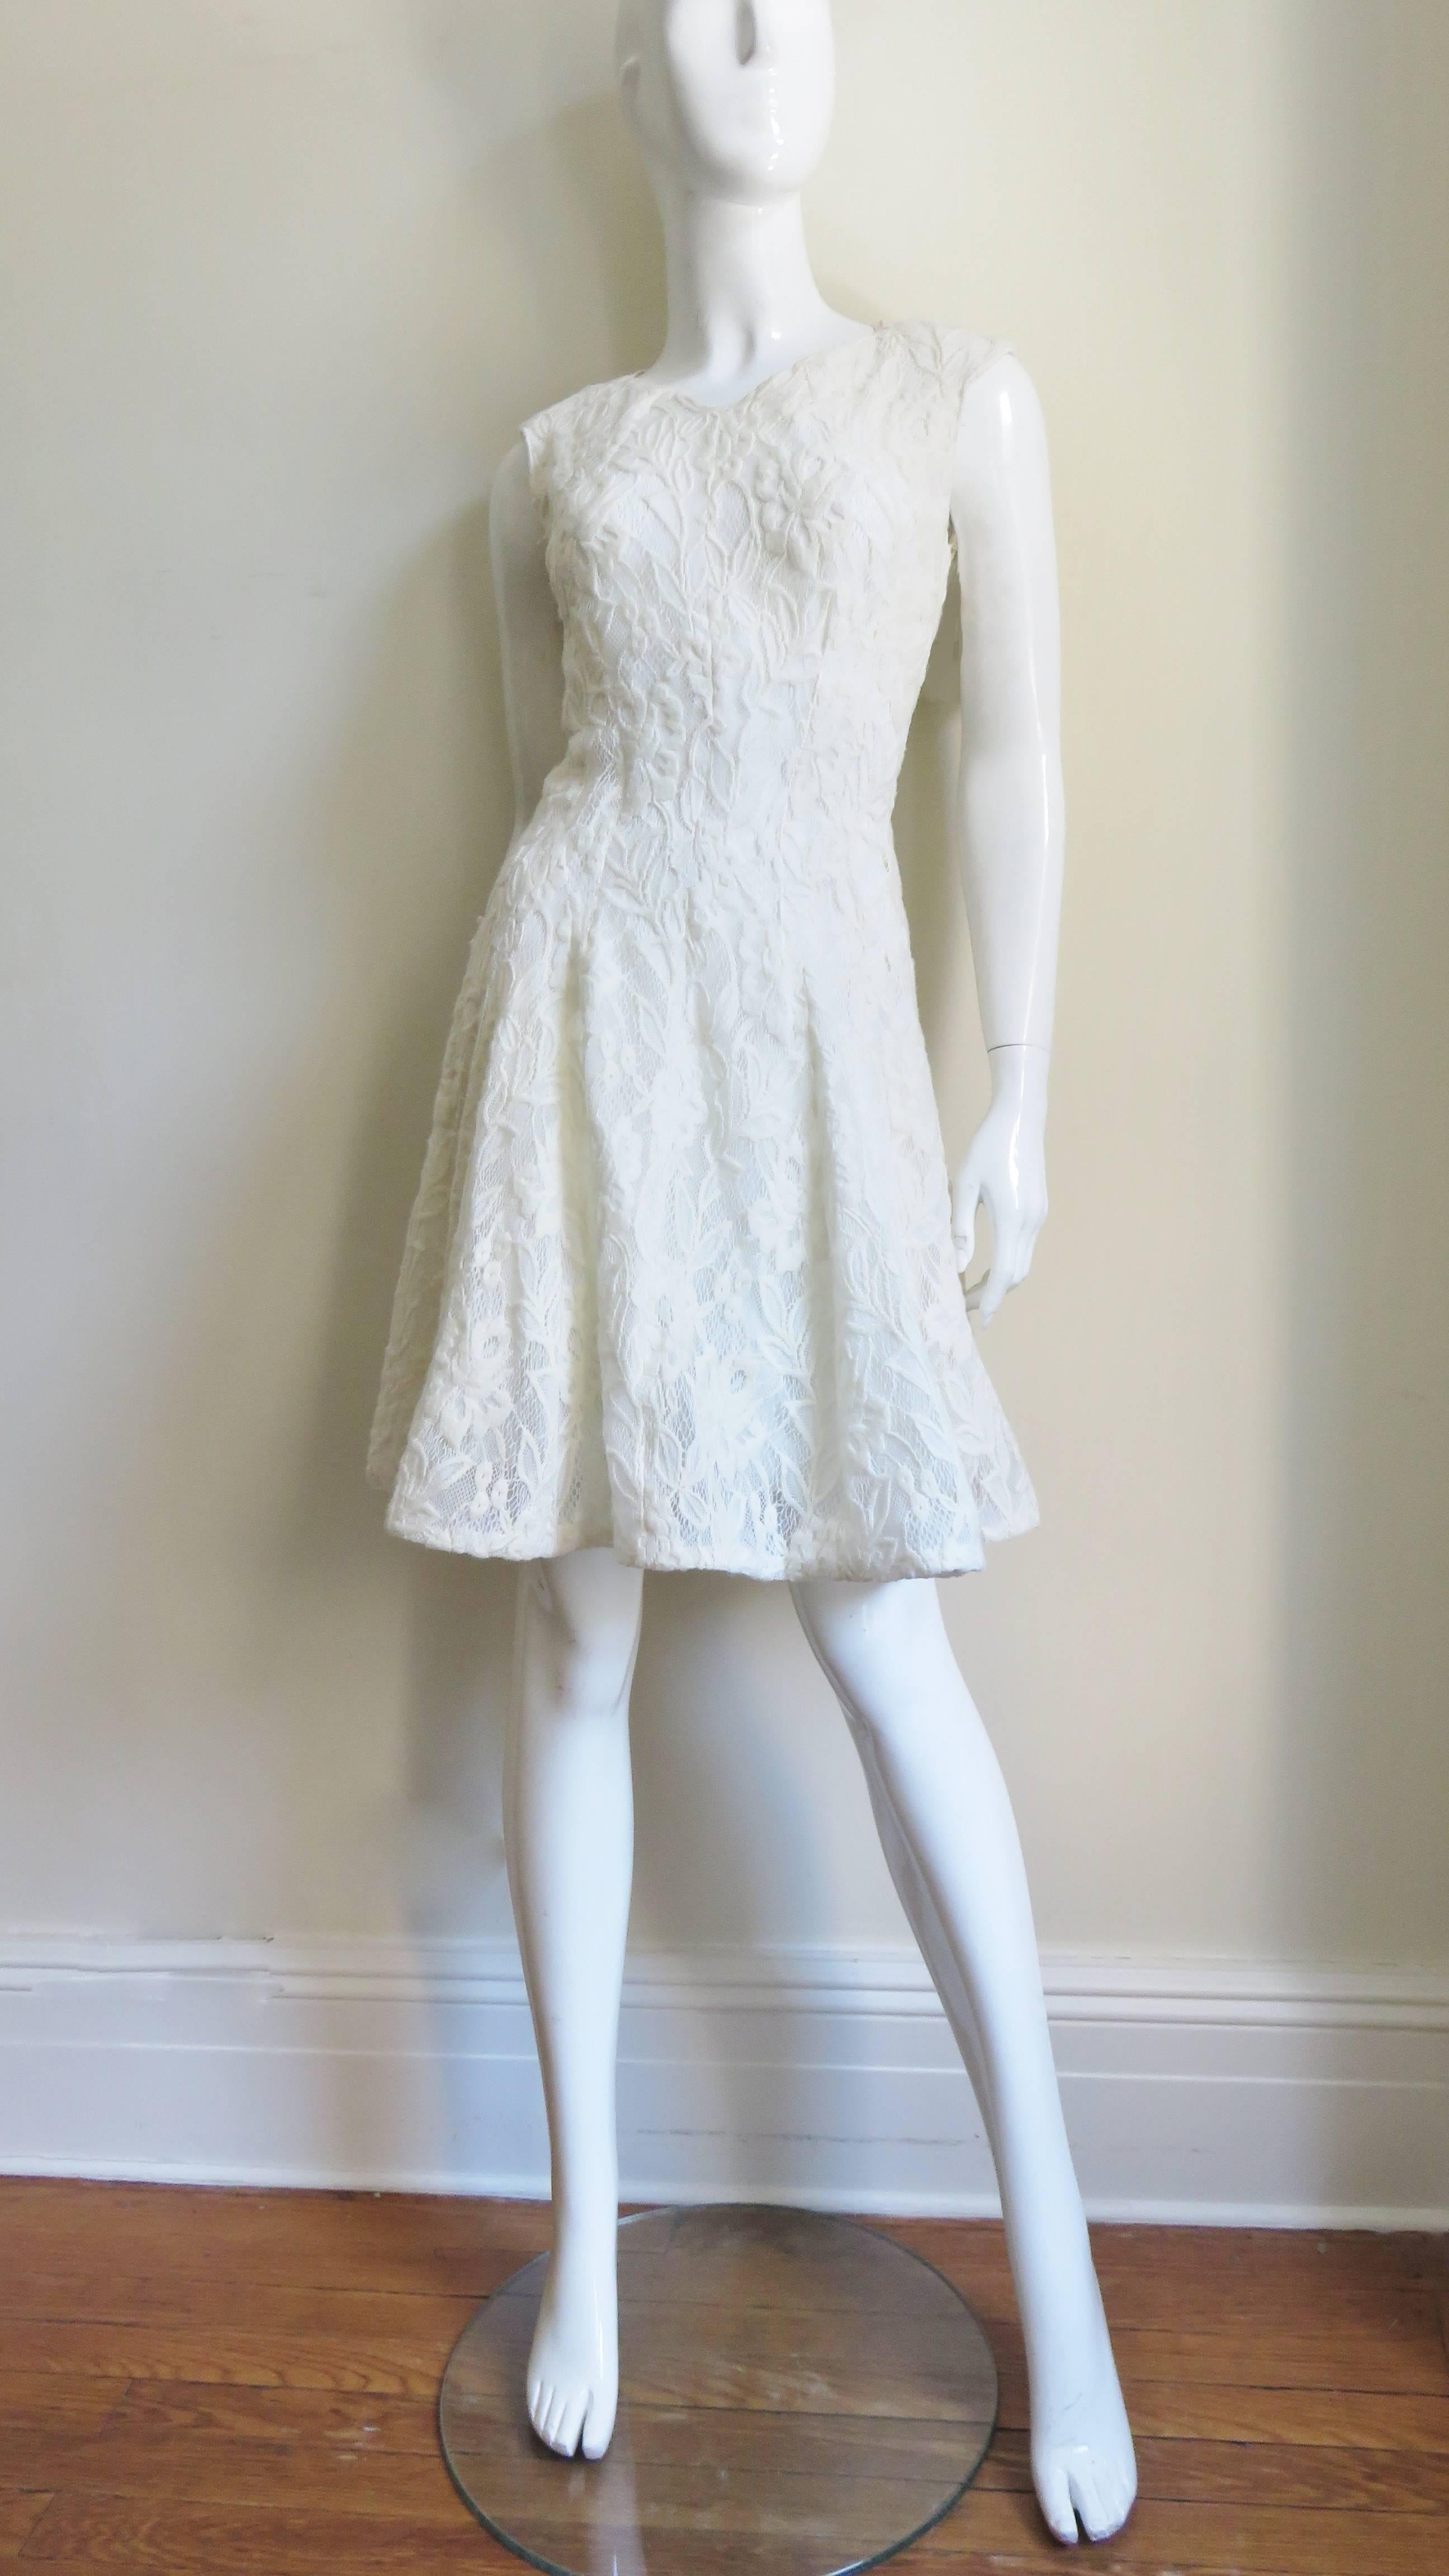 Nina Ricci Lace Dress with Cut out Back For Sale 2